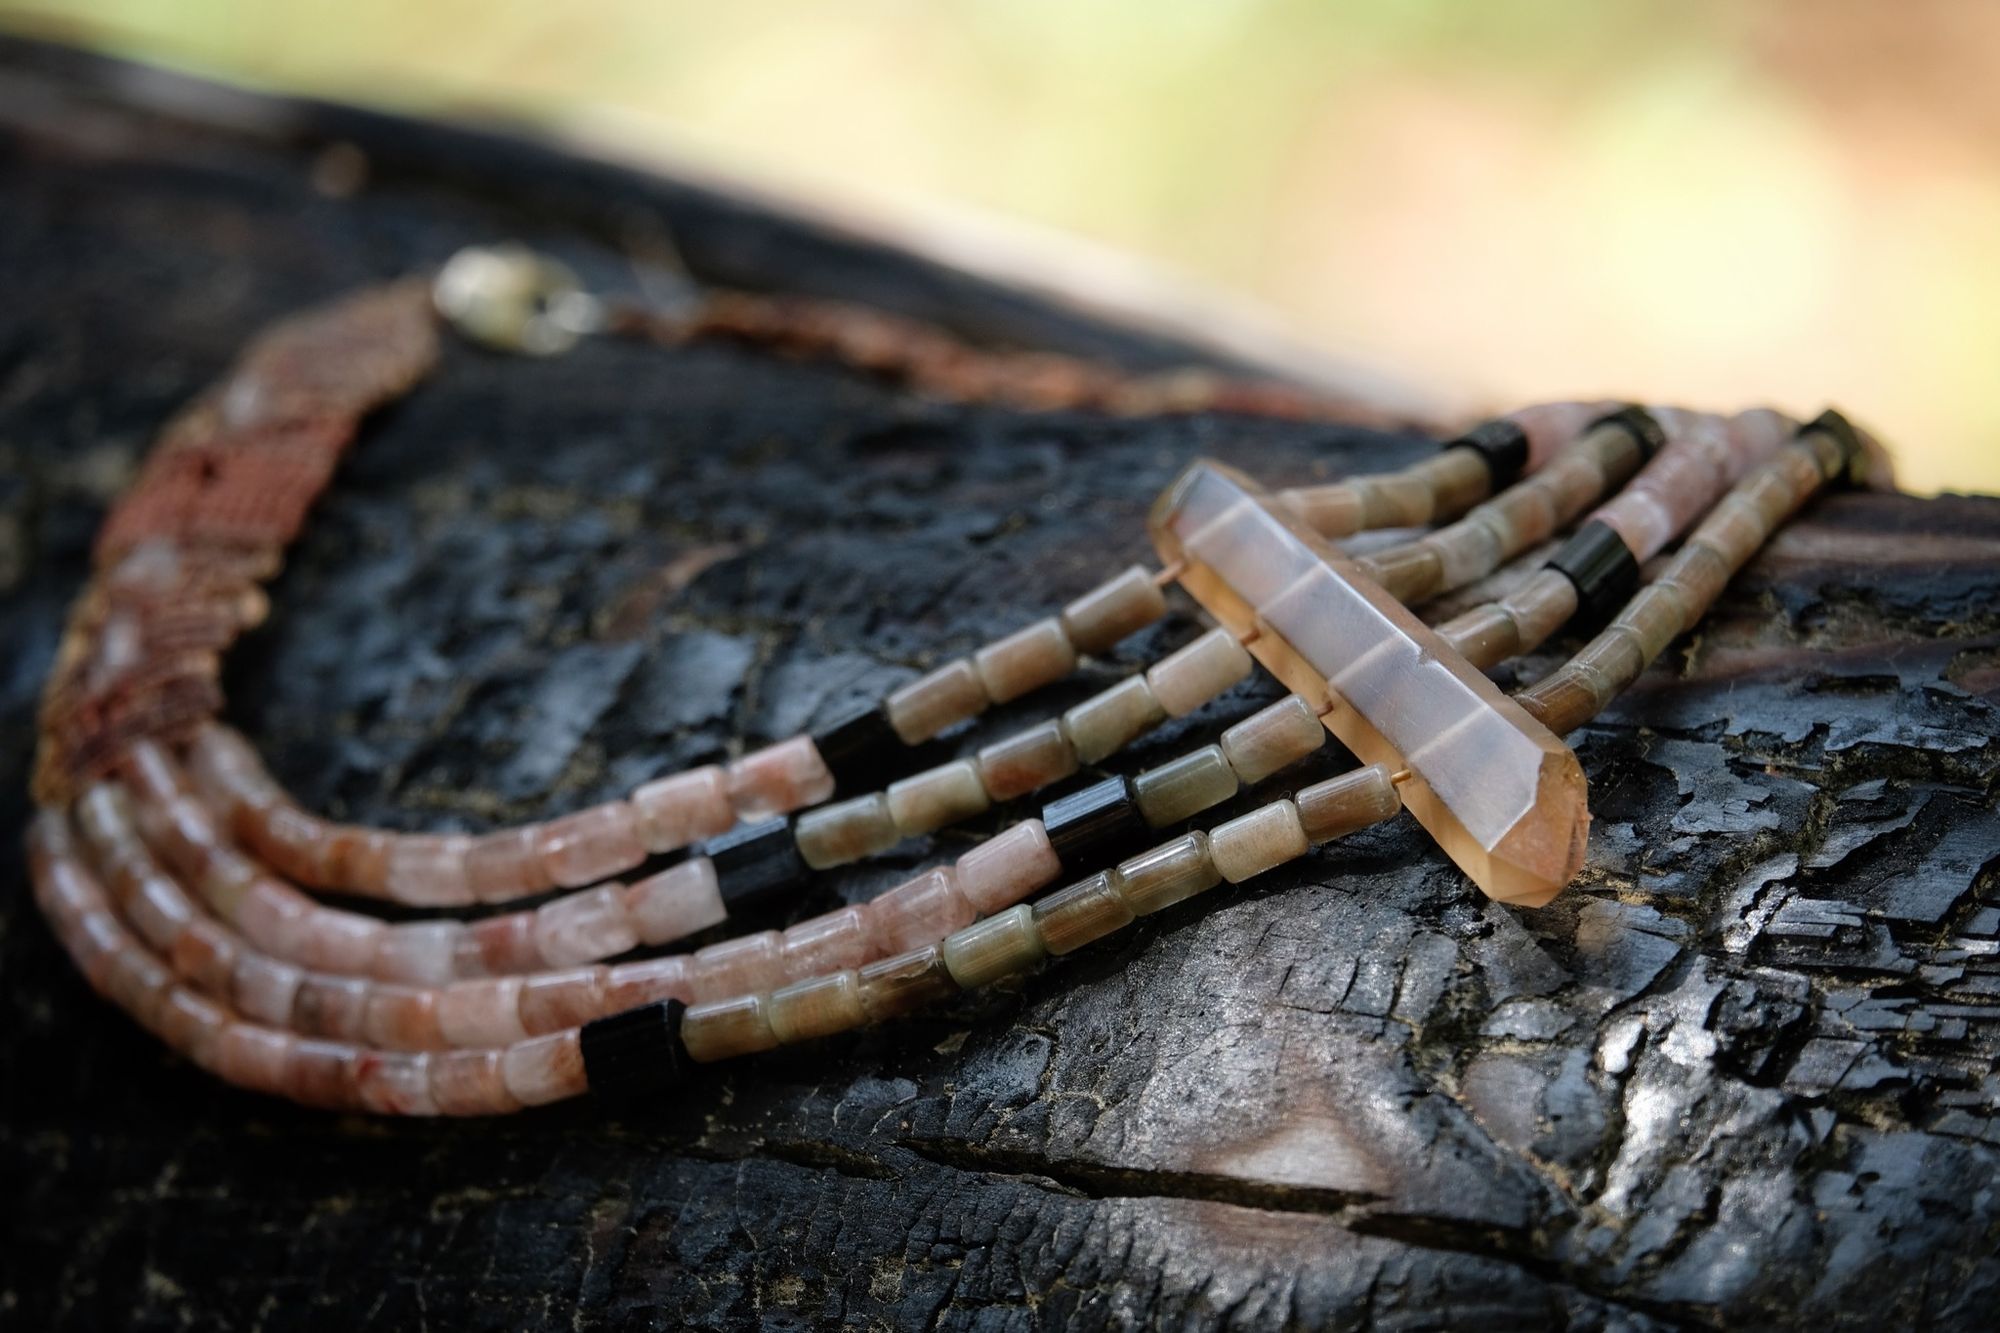 Four strand Zambian citrine, pink Rutilated quartz and black tourmaline necklace laying on a burned log